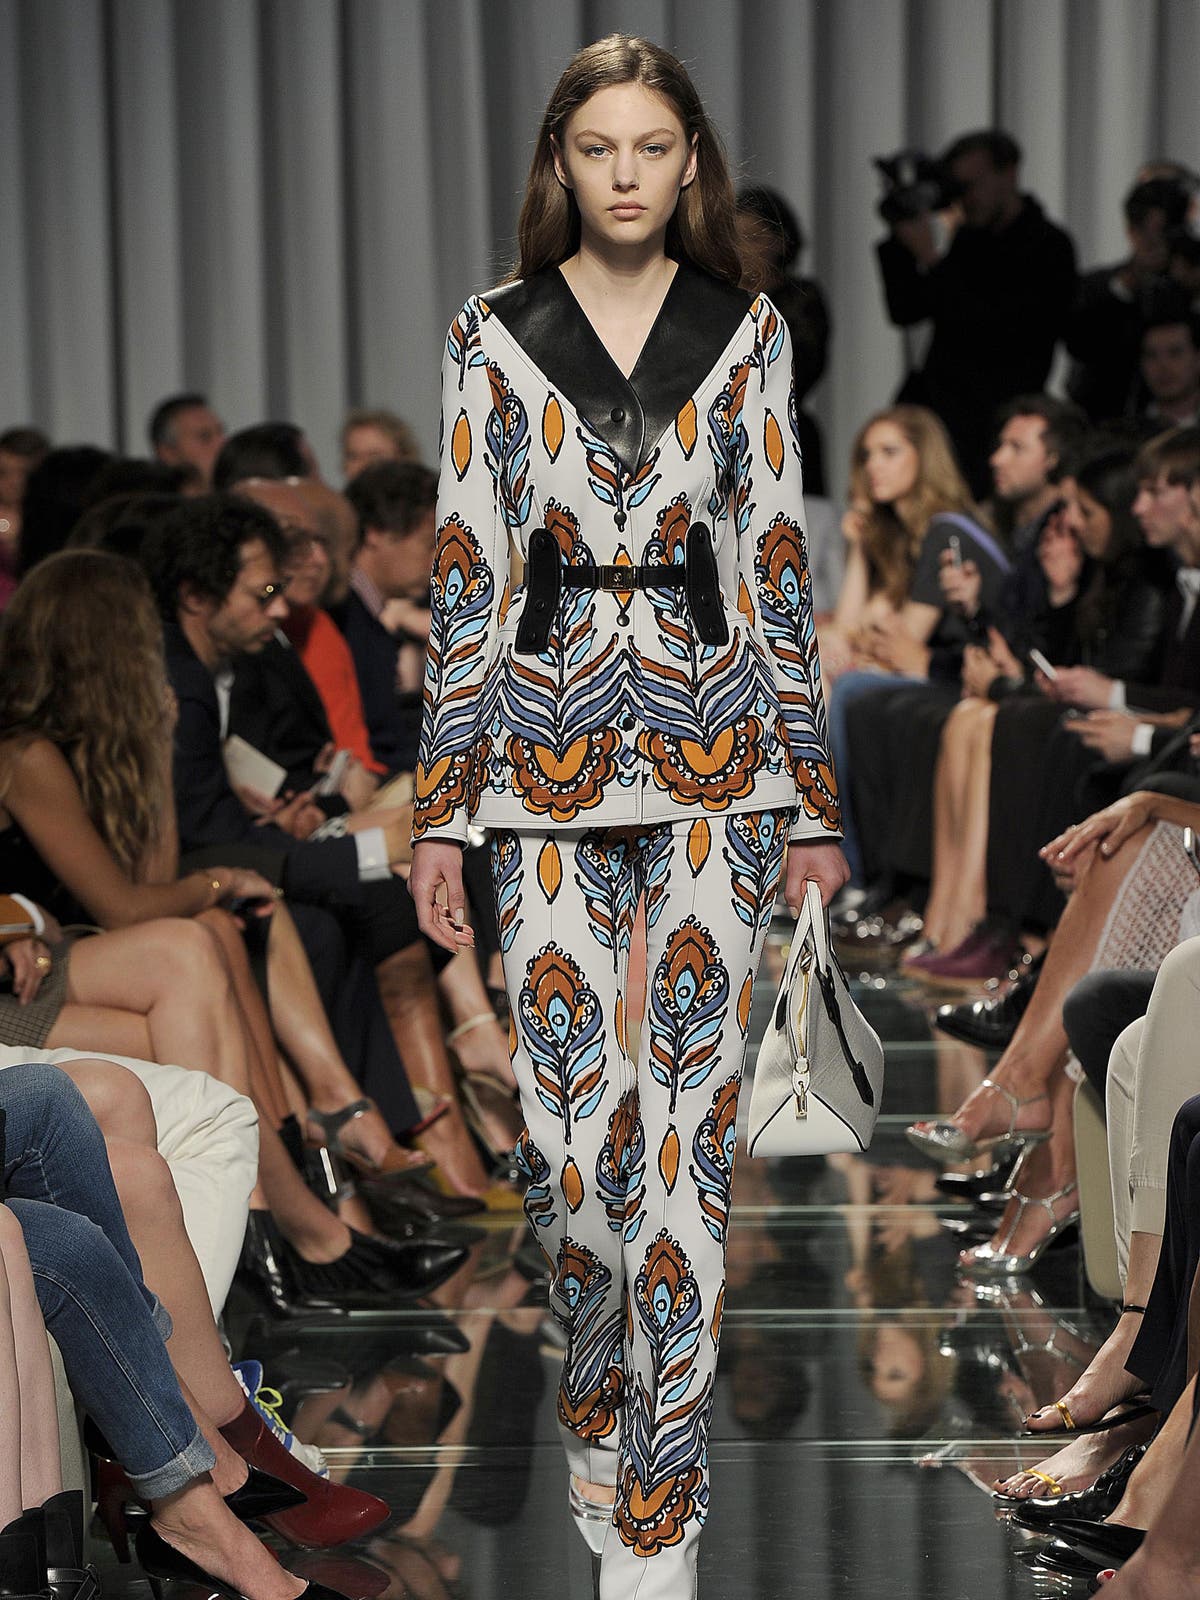 Nicolas Ghesquiere shows Louis Vuitton Cruise collection: Nothing lazy ...